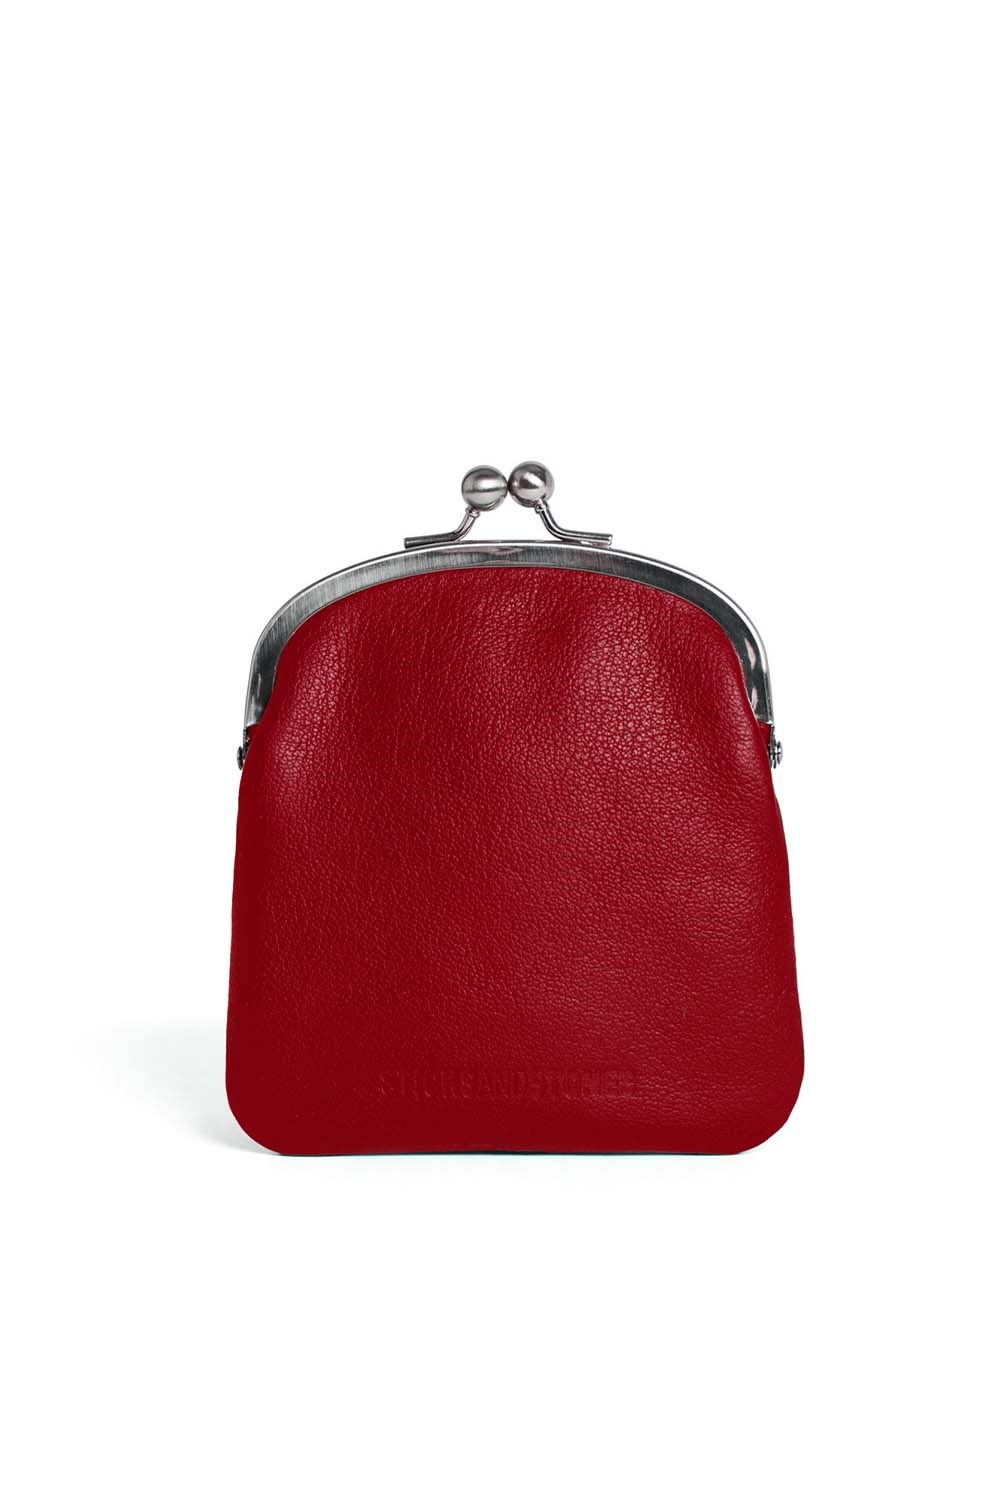 Delphi purse - Buff Washed Red